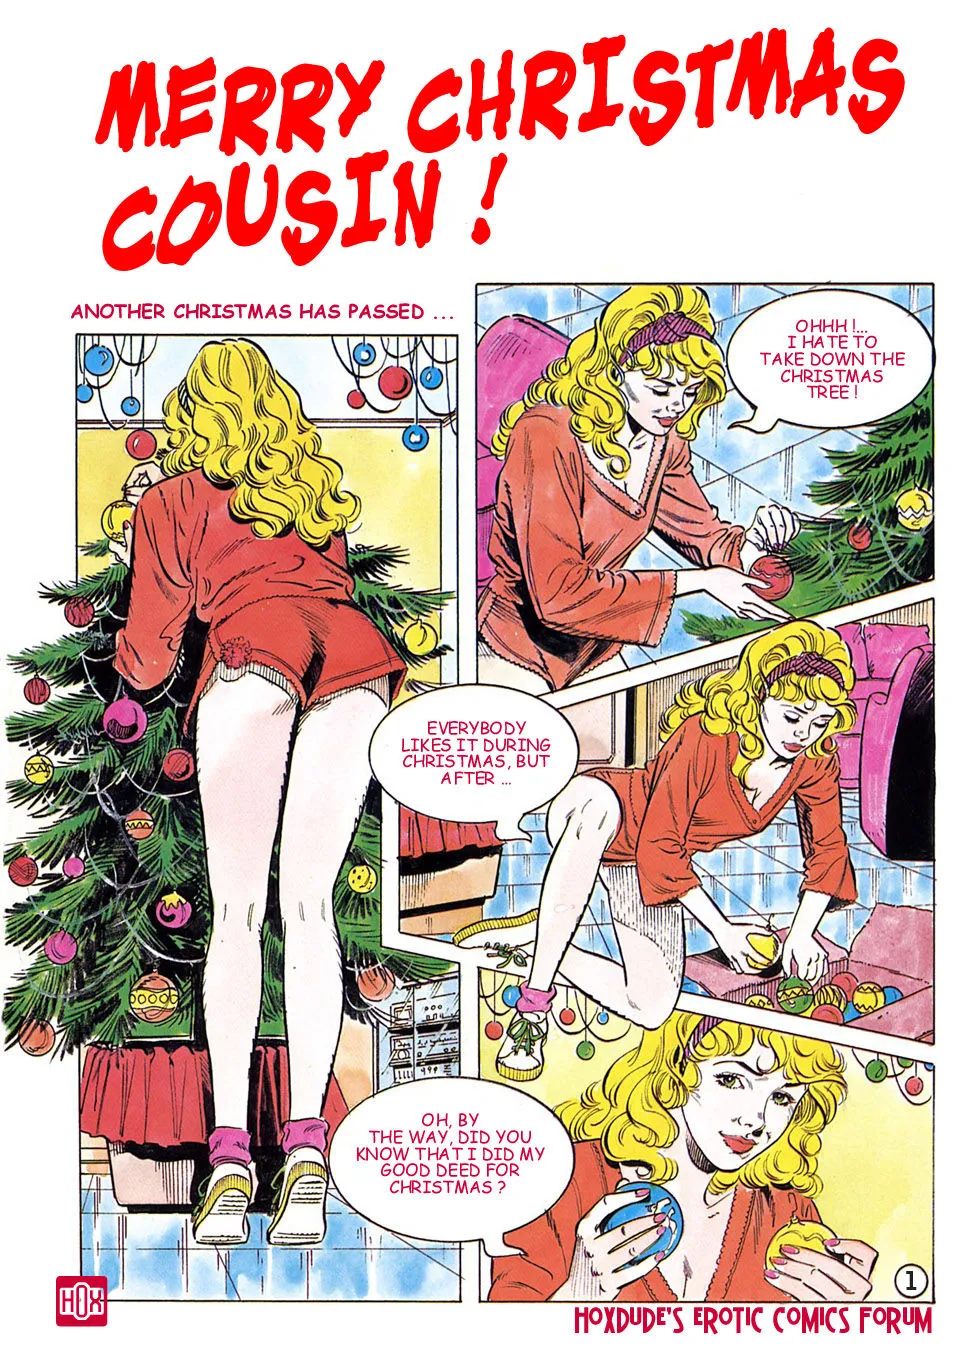 Merry Christmas Cousin! – Dino Leonetti - Page 2